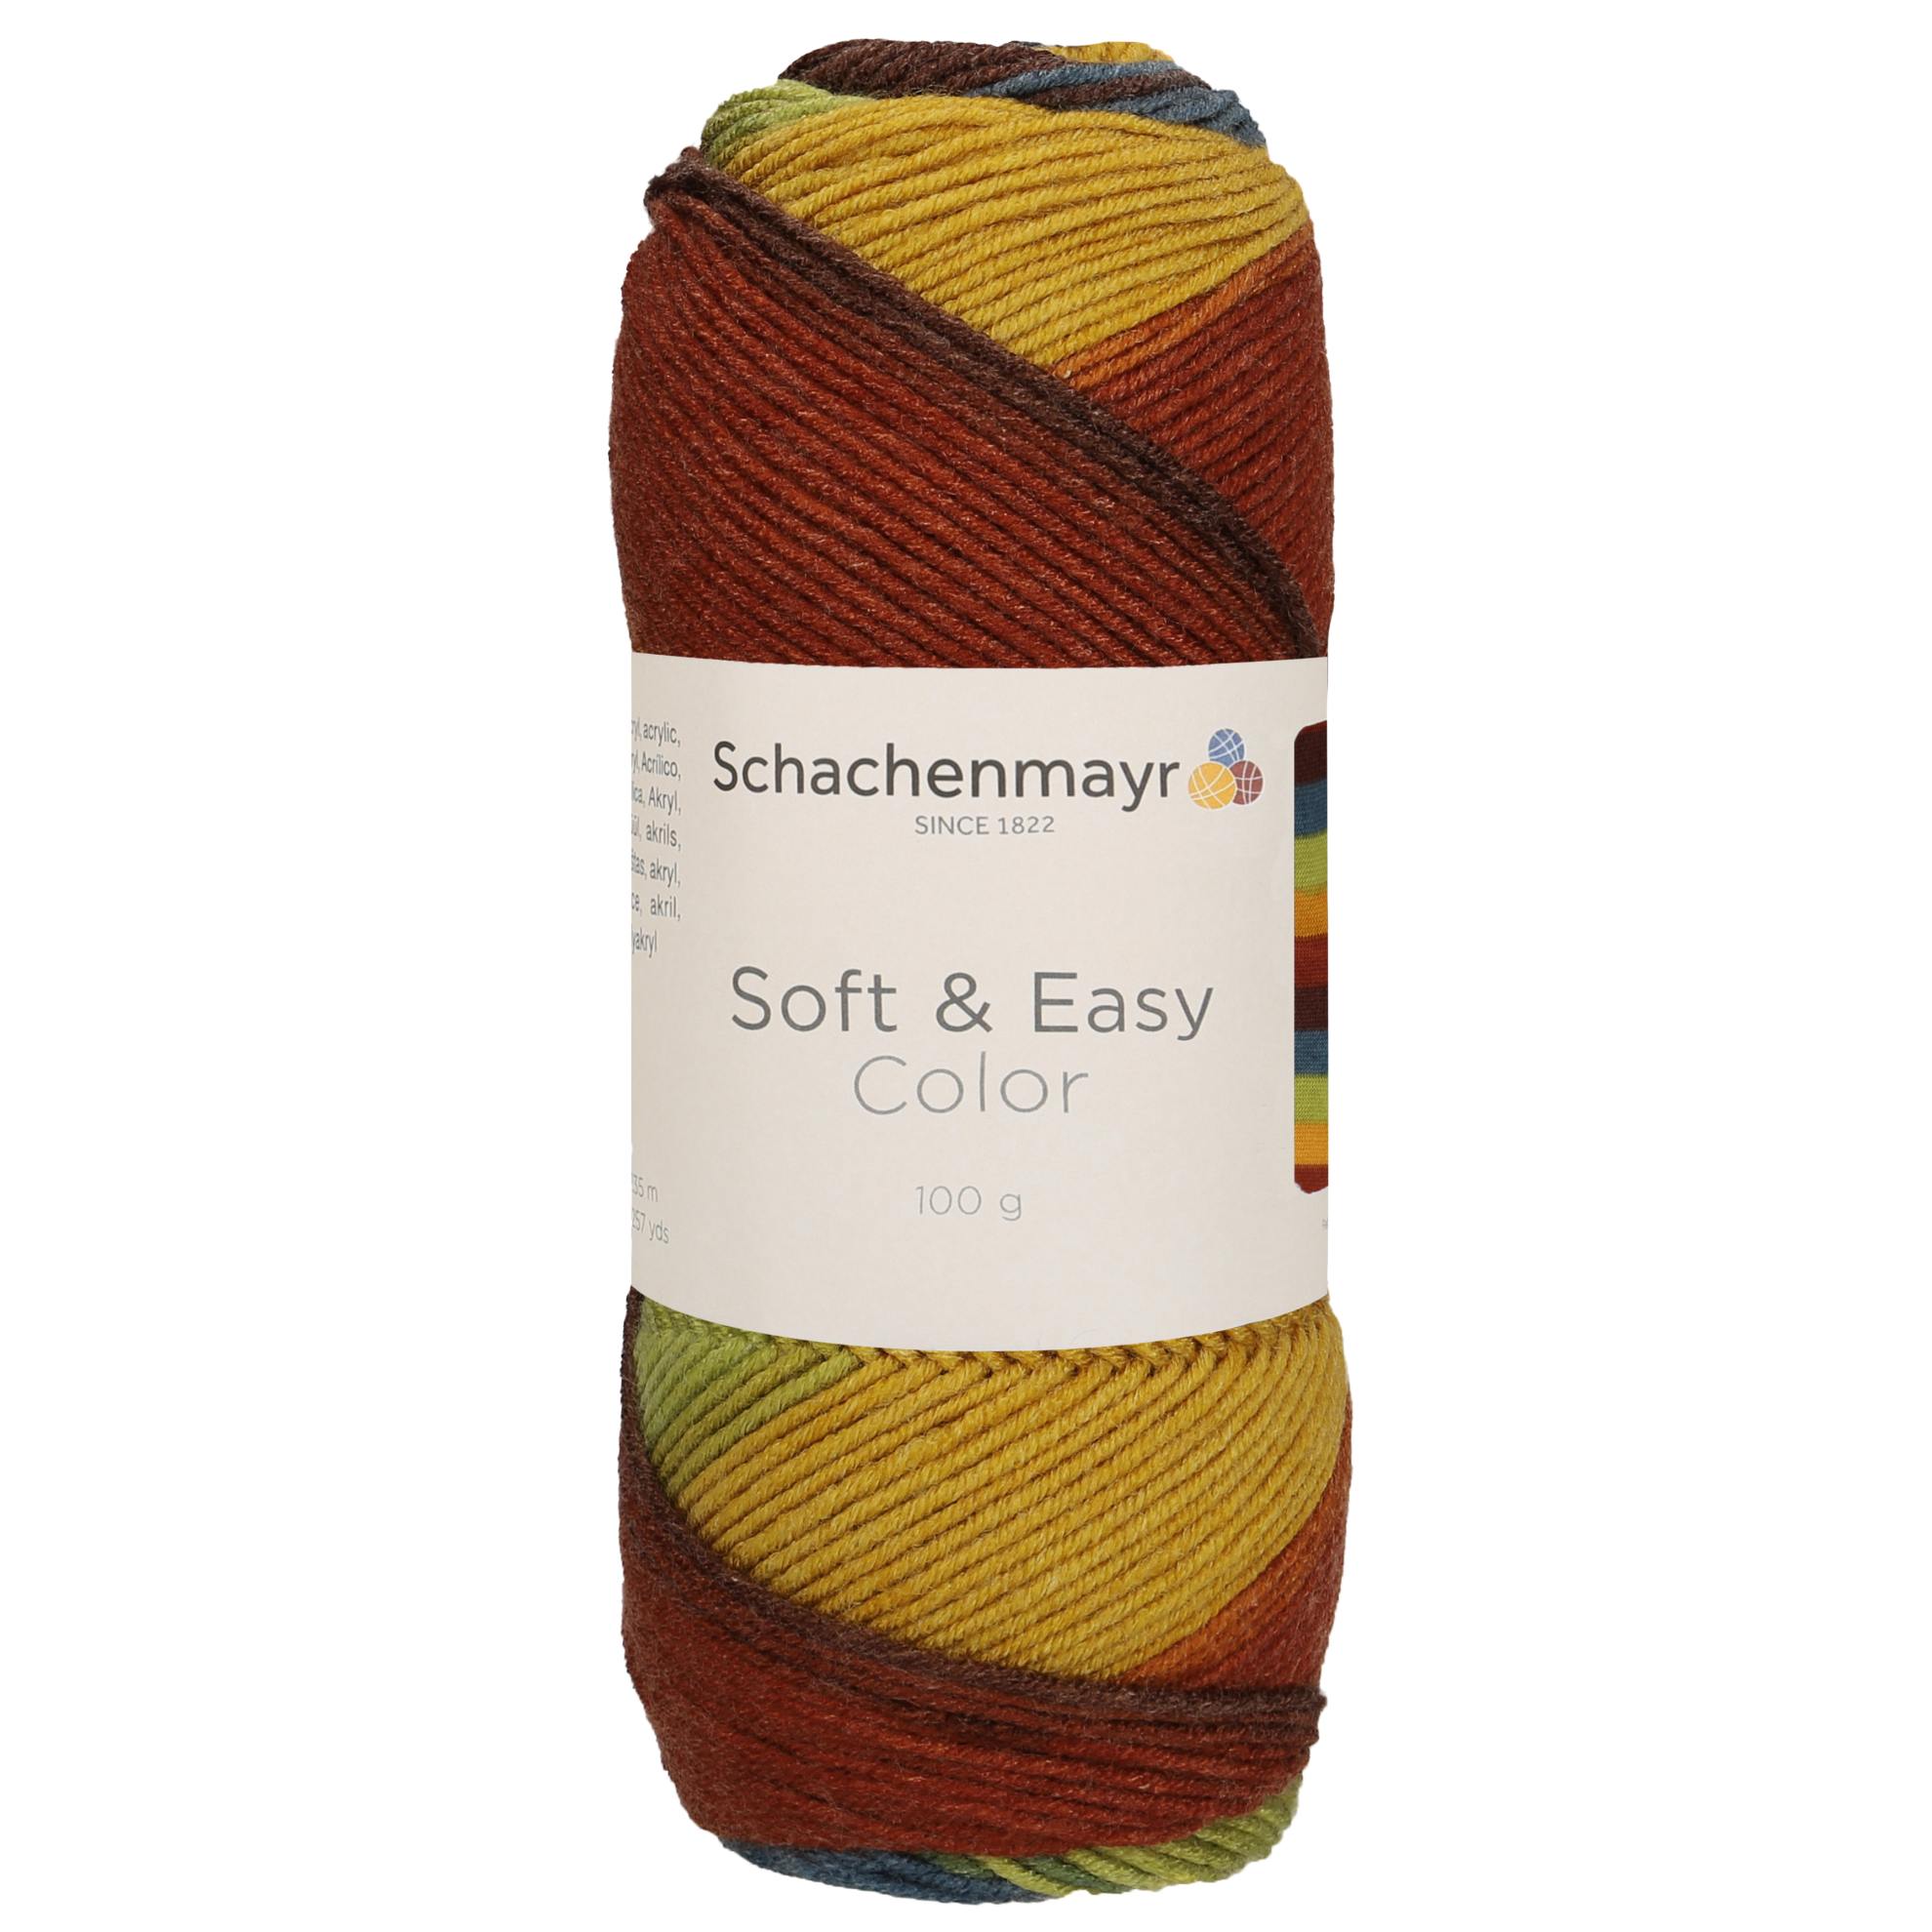 schachenmayr_soft_and_easy_color_00096